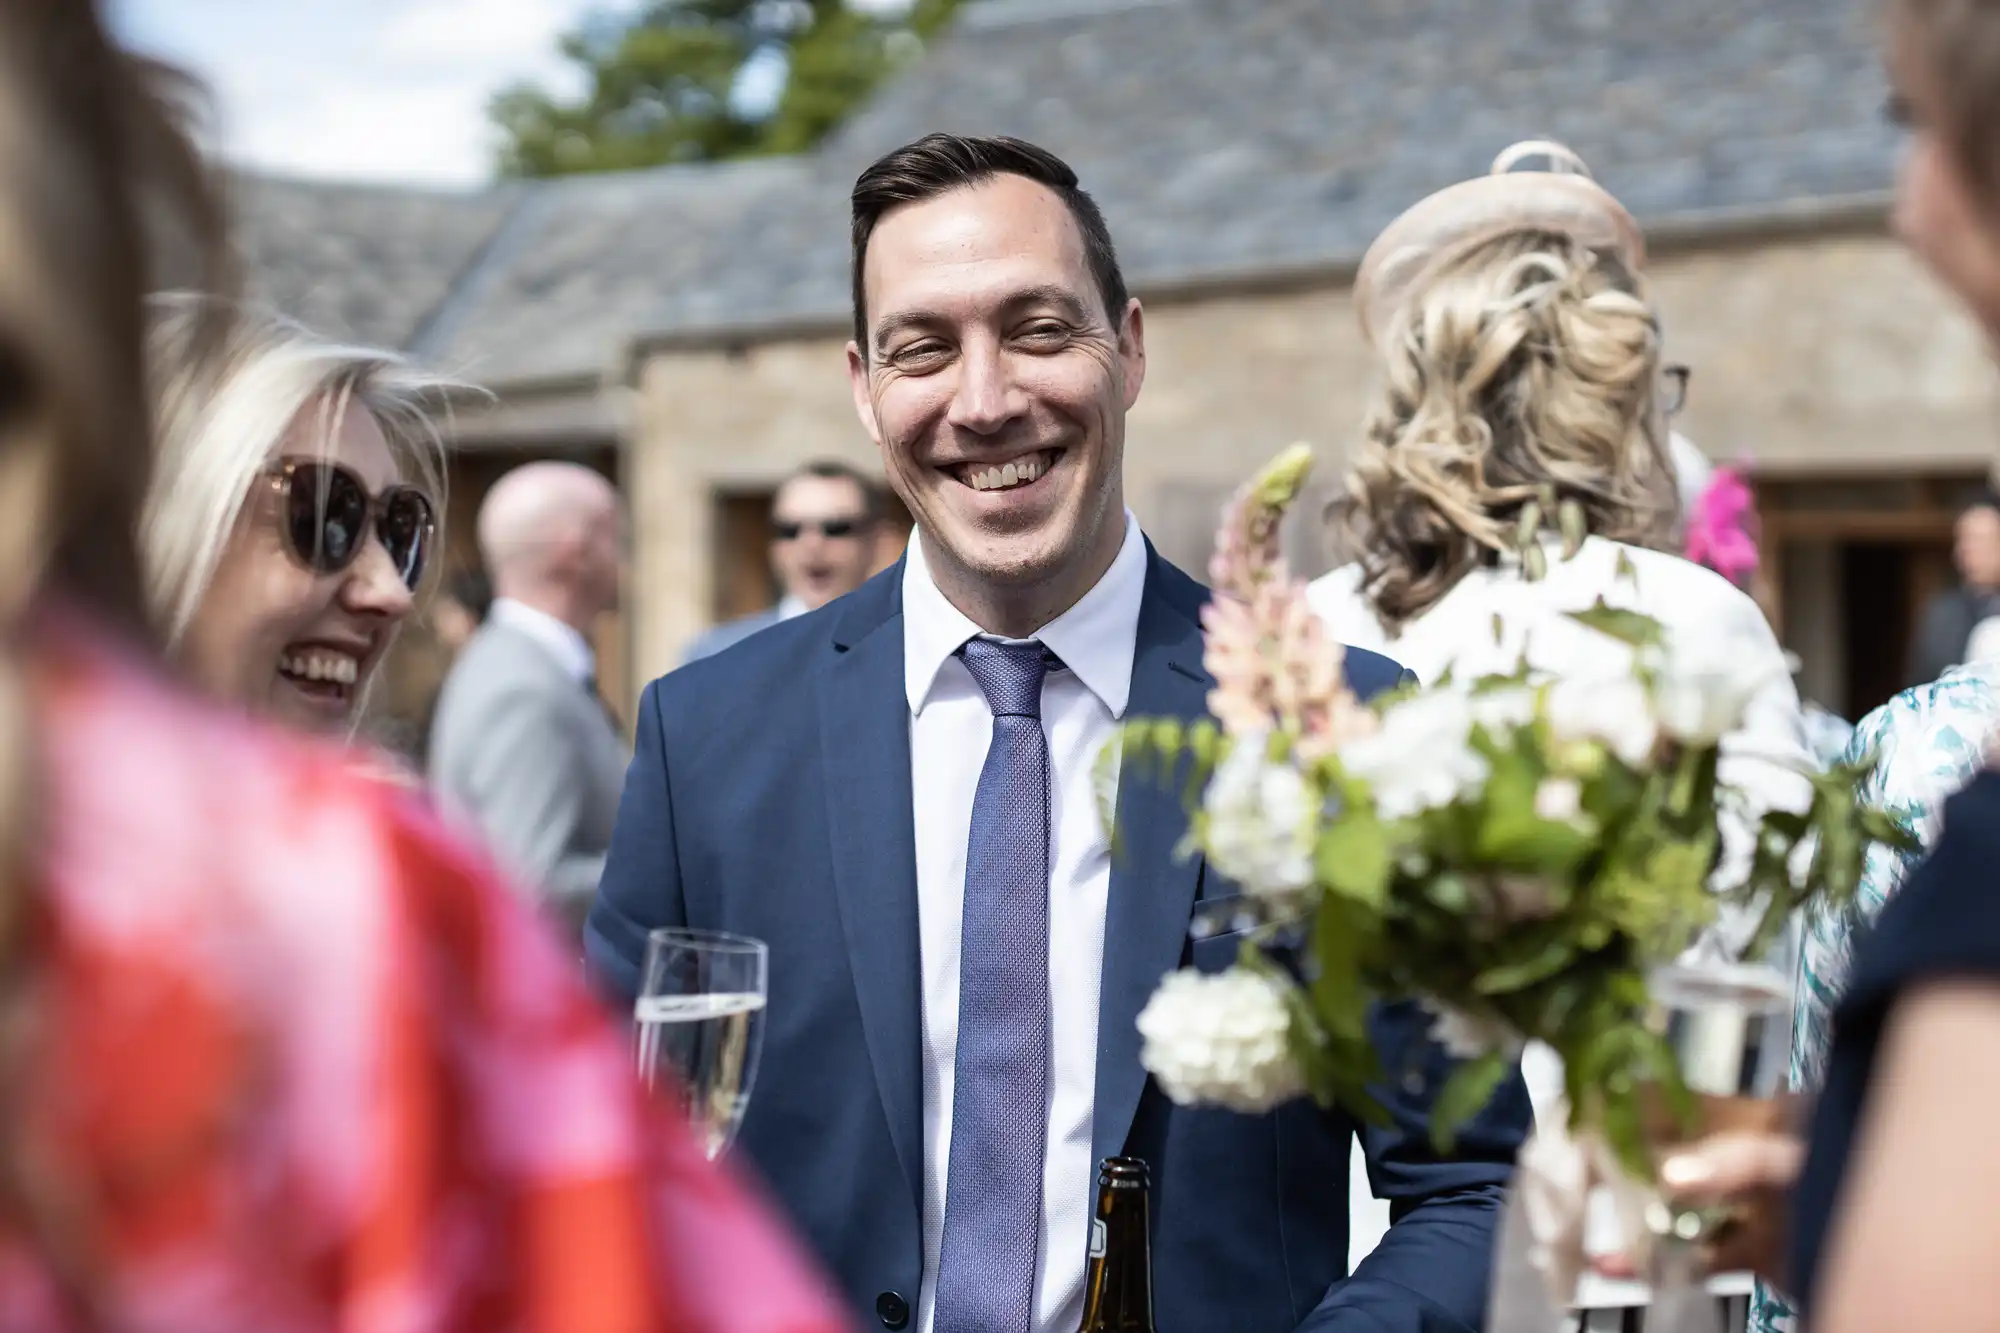 A man in a suit smiling at a wedding reception, surrounded by guests and floral decorations in a sunny outdoor setting.